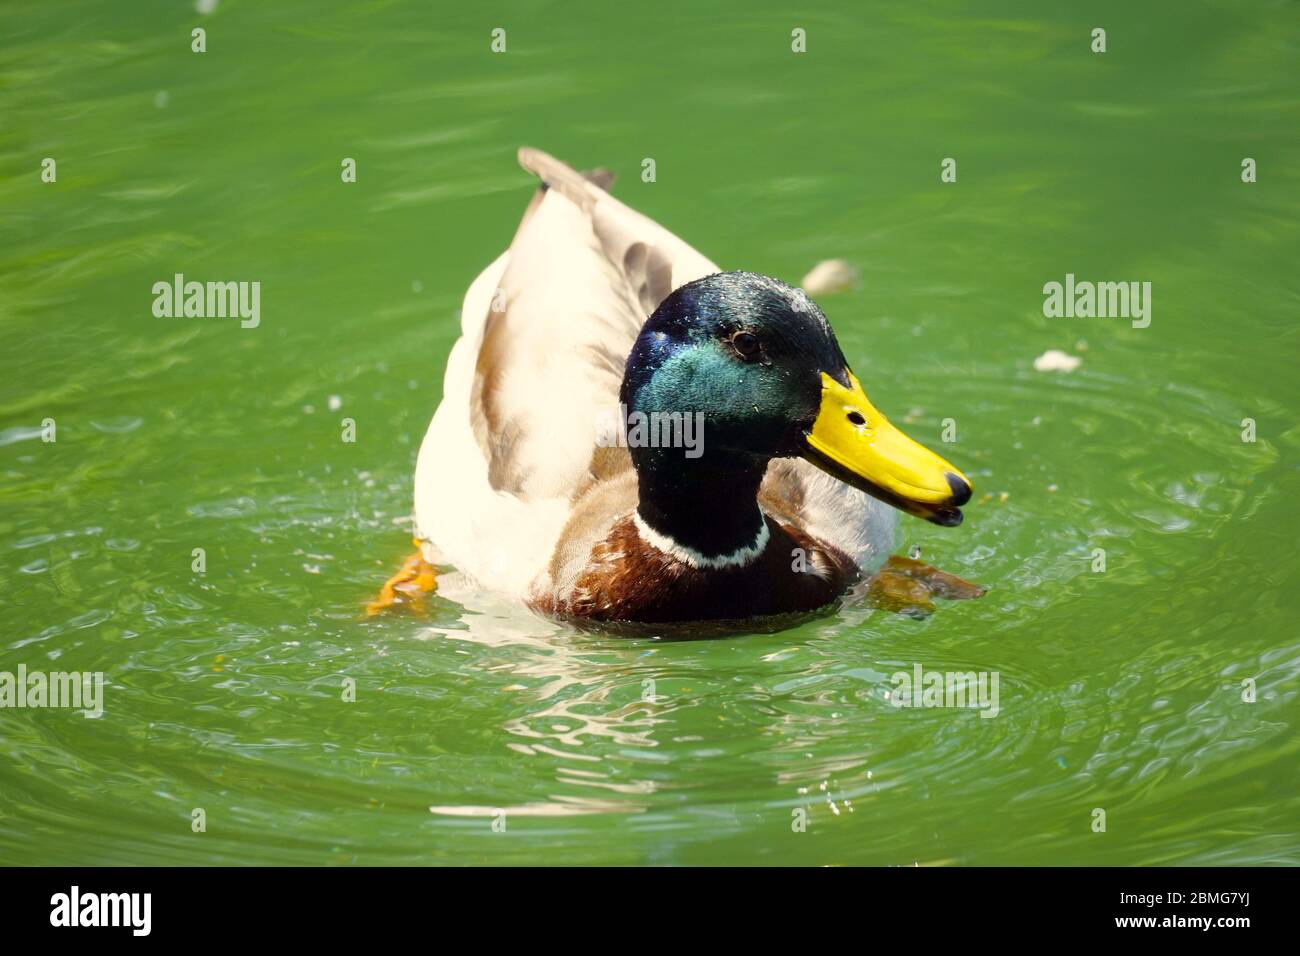 Single male duck on the water floating facing to the left side. Colourful photography, close-up. Reflections of the duck on the water surface. Stock Photo